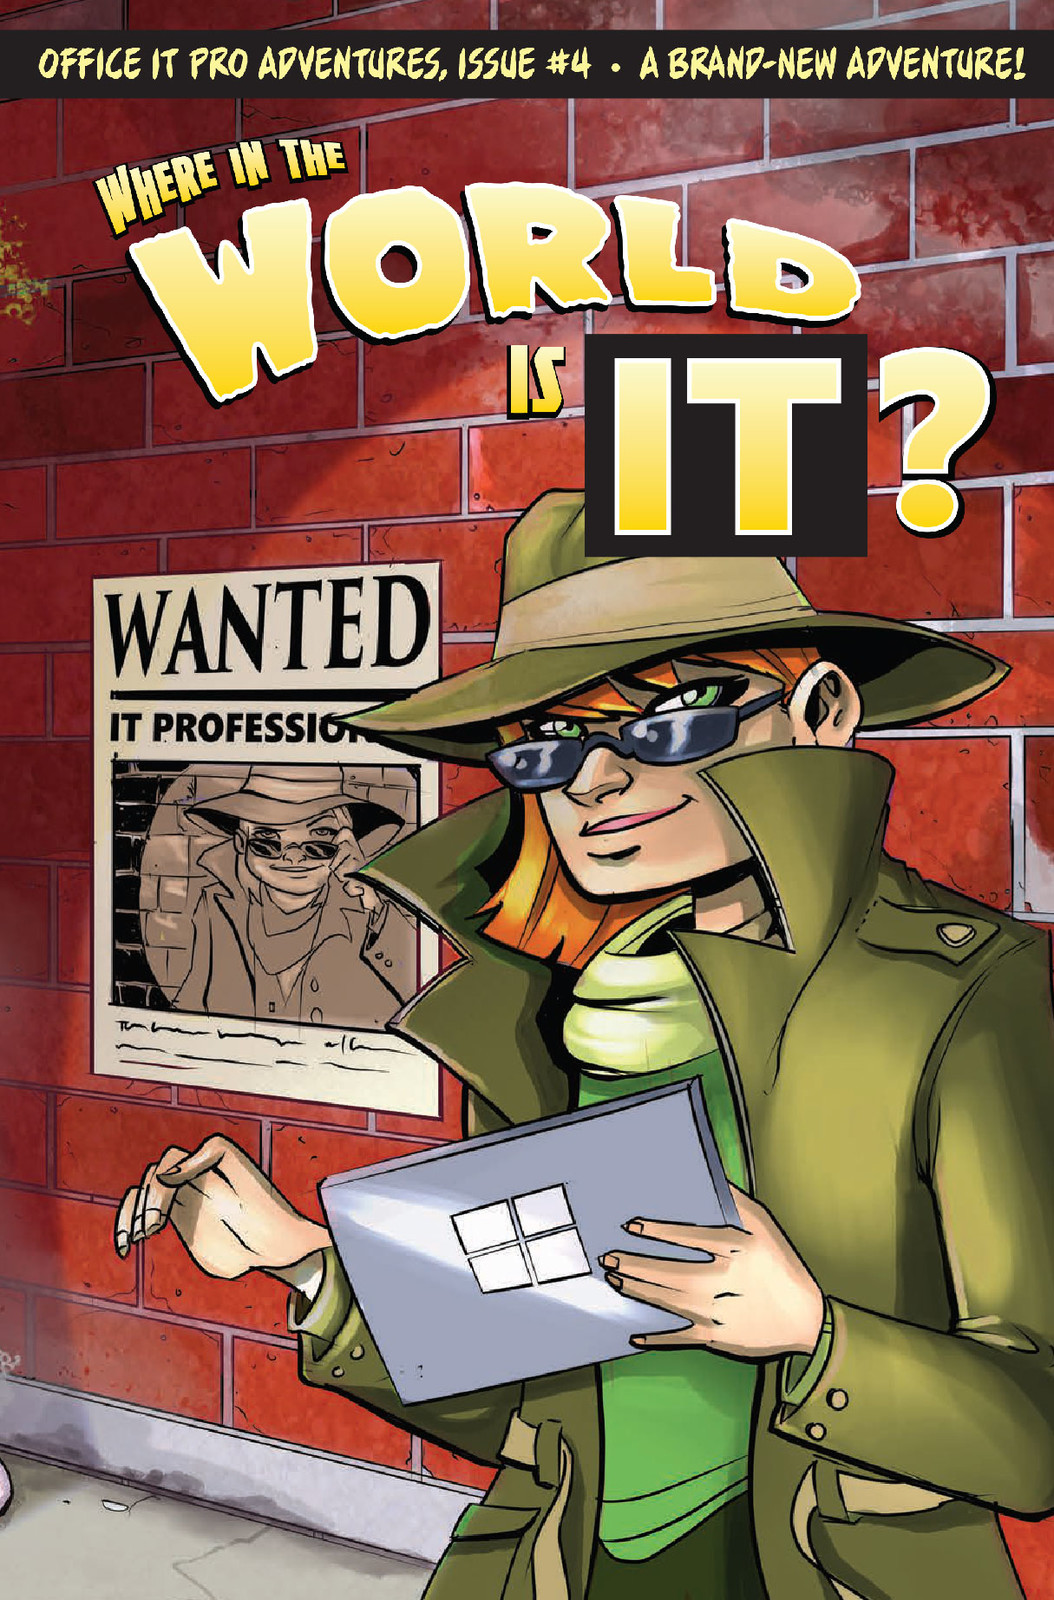 Office IT Pro Adventures #4 "Where in the World is IT?" 